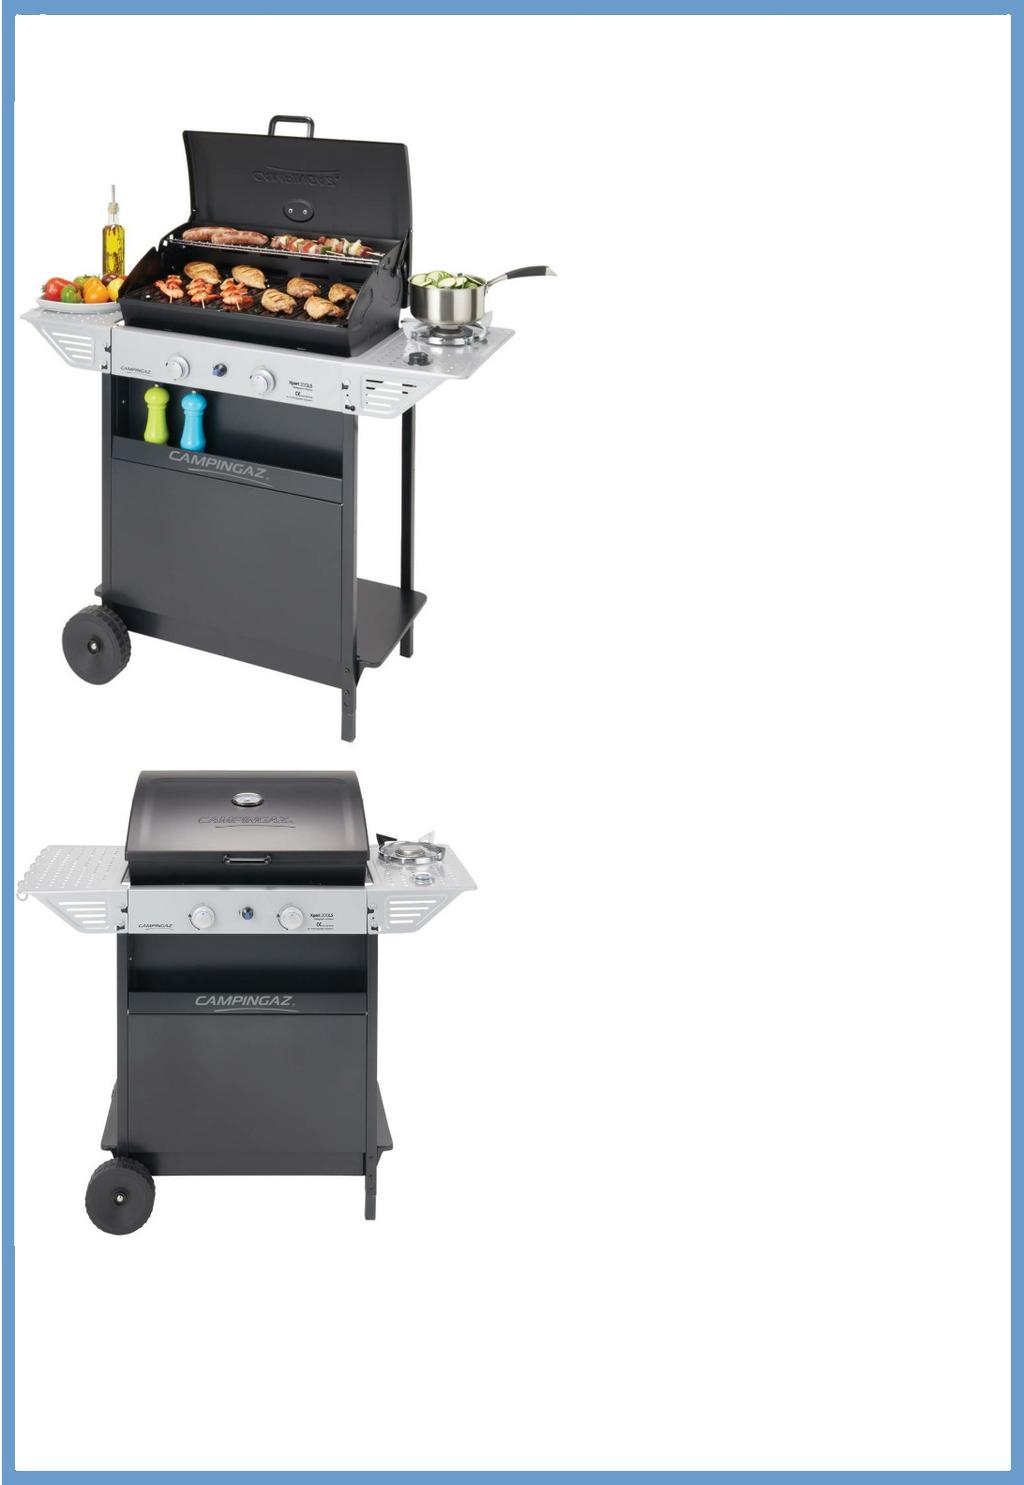 XPERT 200 LS 129.99 Cooking surface (cm²): 1870 Cooking Dimensions (cm): 54.5 x 34.5 cm Burner: Waffle burner, aluminised steel Number of burners: 2 Power: 7.1 kw + 2.